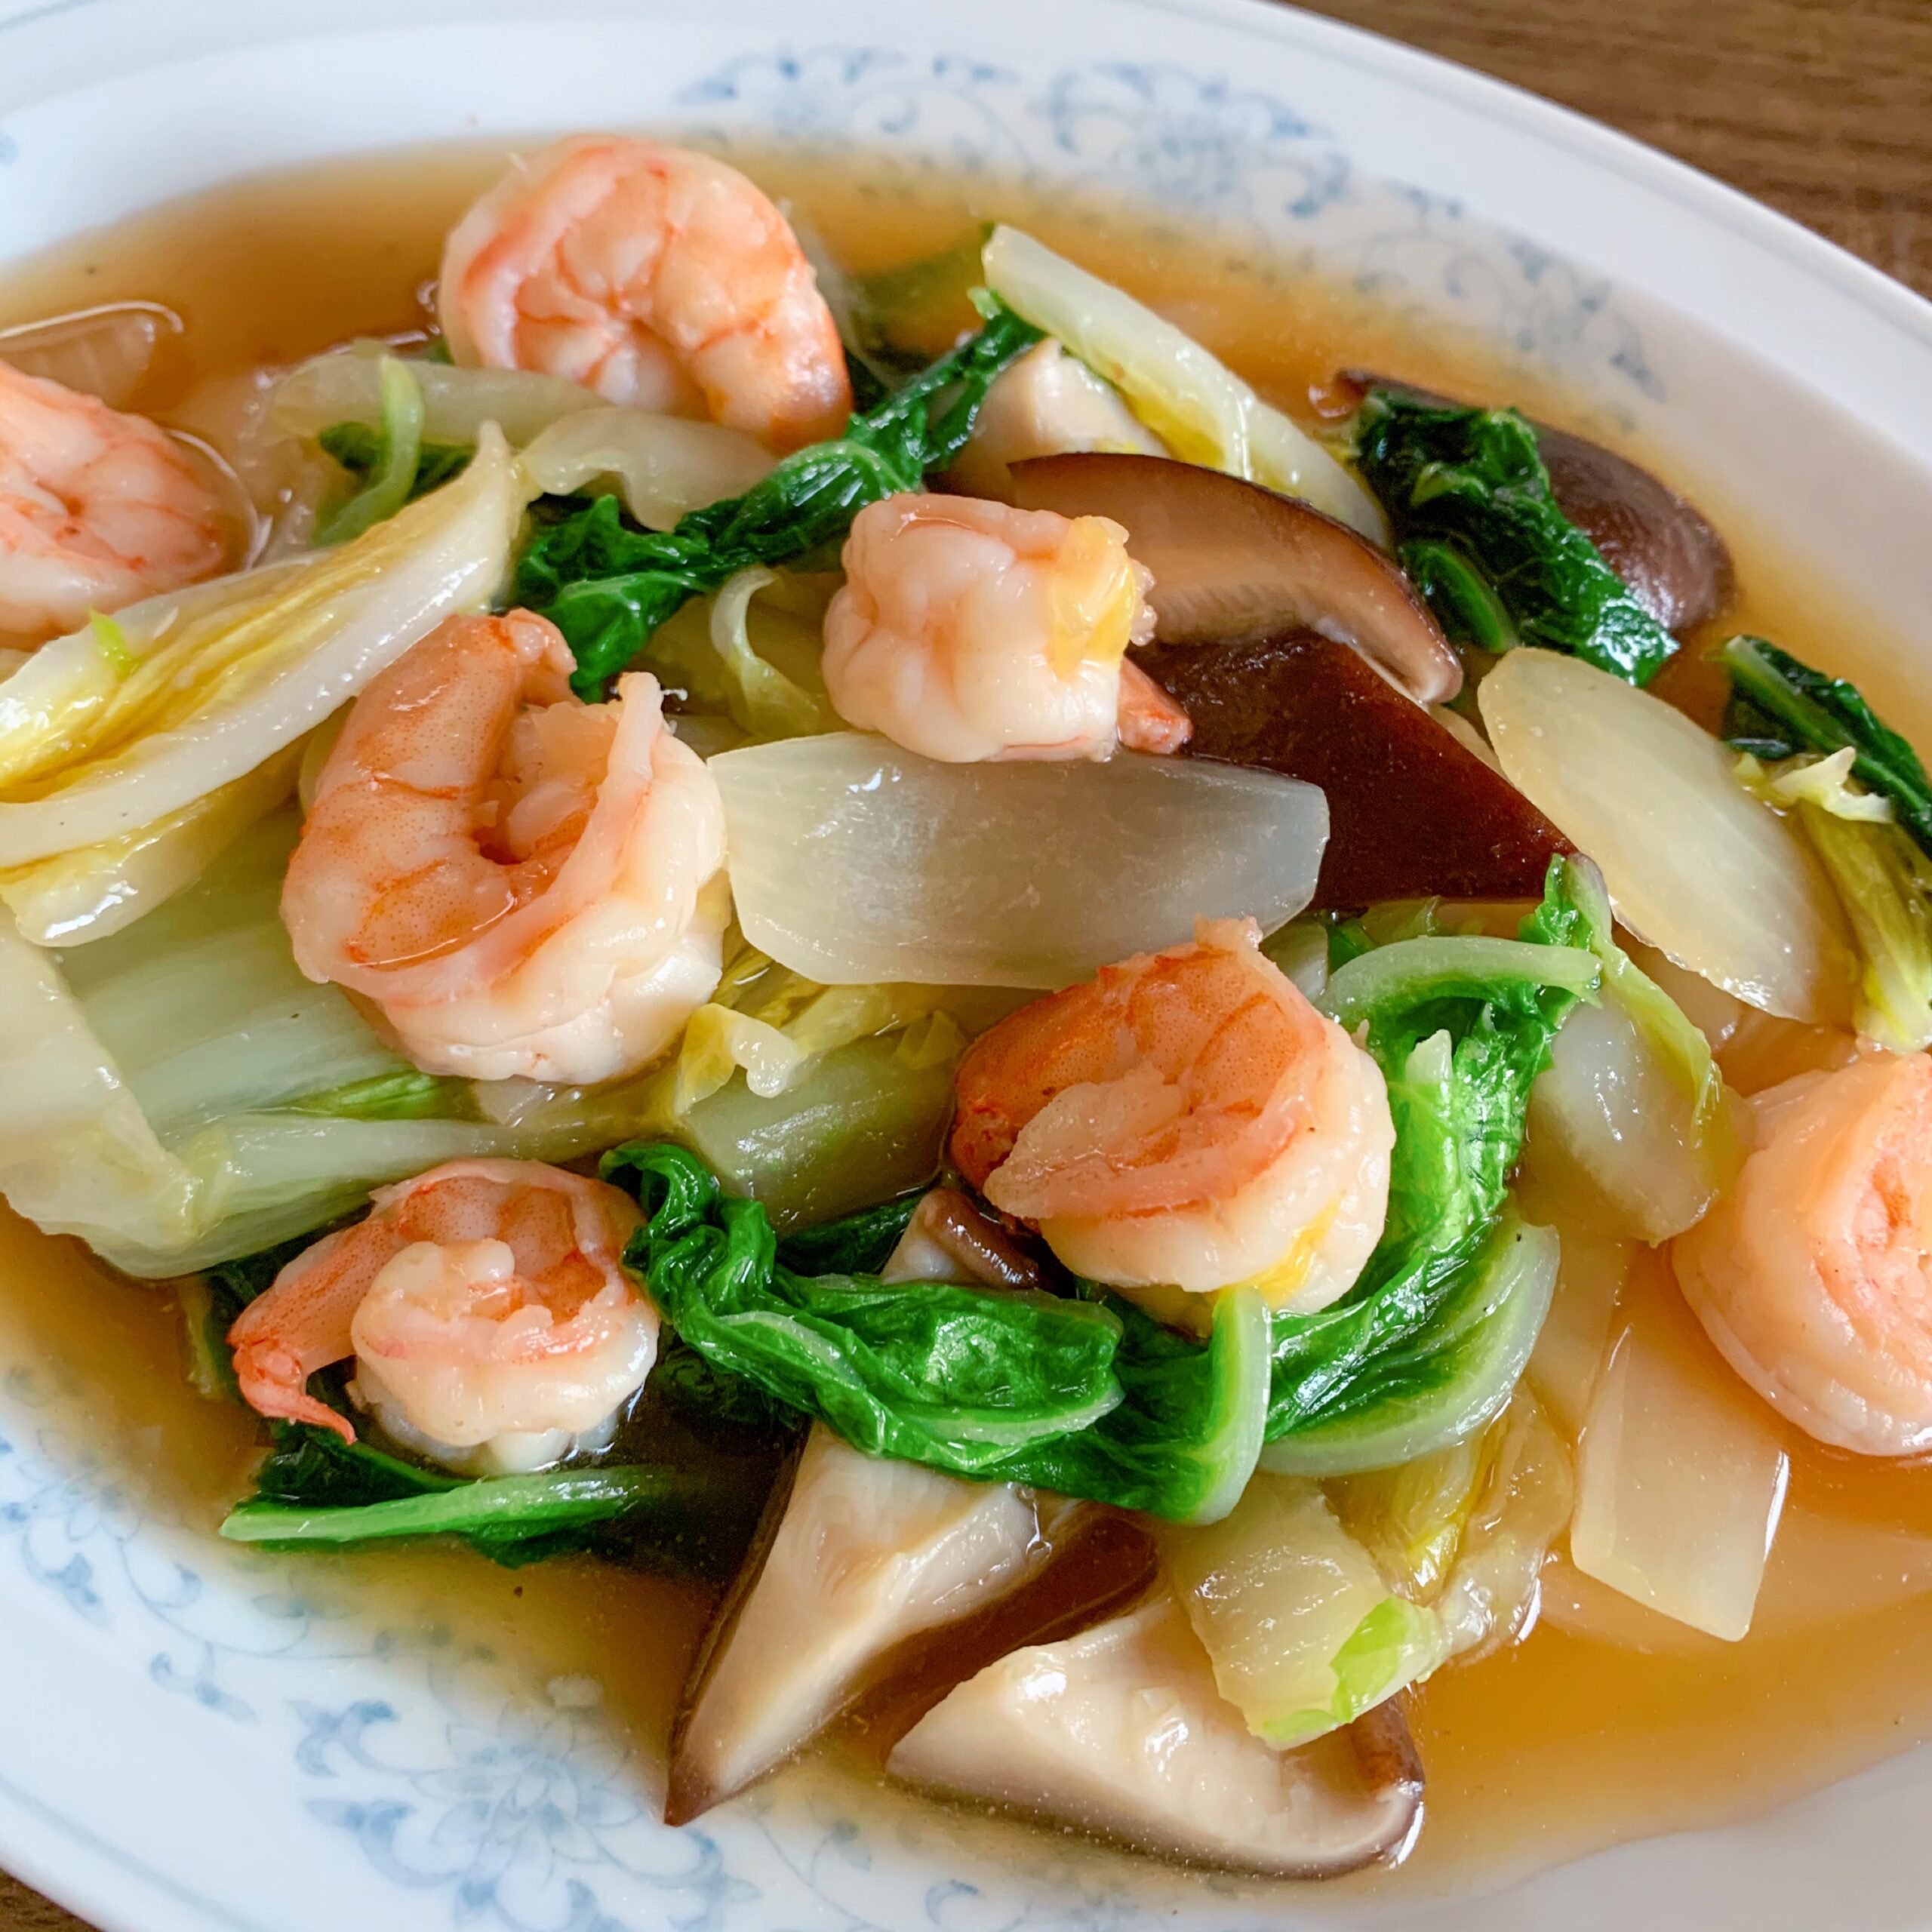 Stir-fried shrimp and vegetables seasoned with chicken broth mix. 